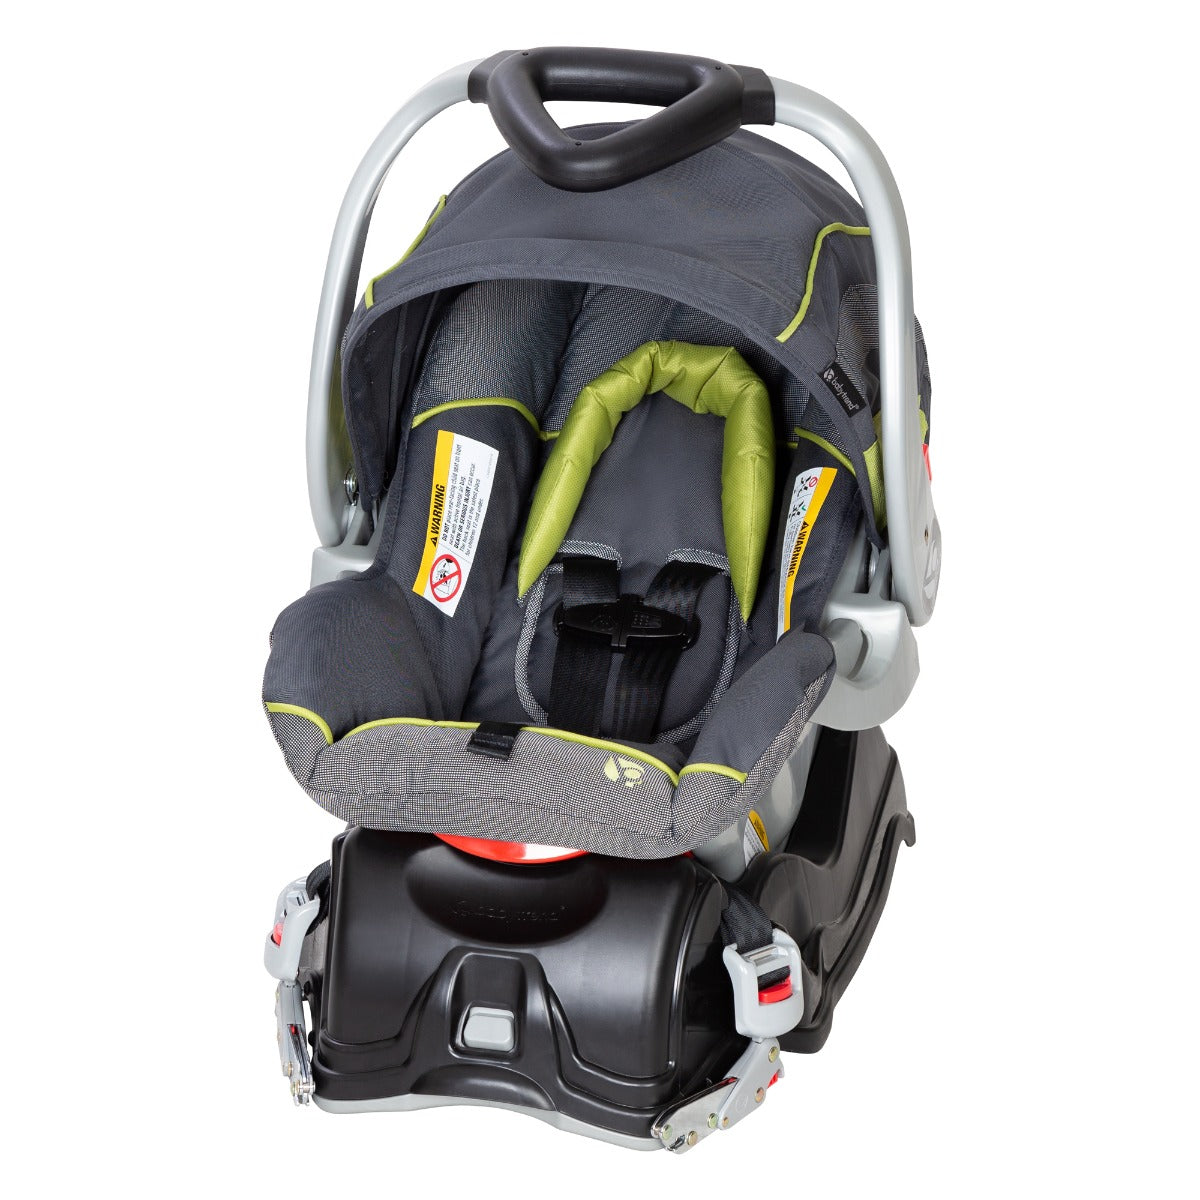 Baby Trend EZ Flex-Loc Infant Car Seat in gray and green color